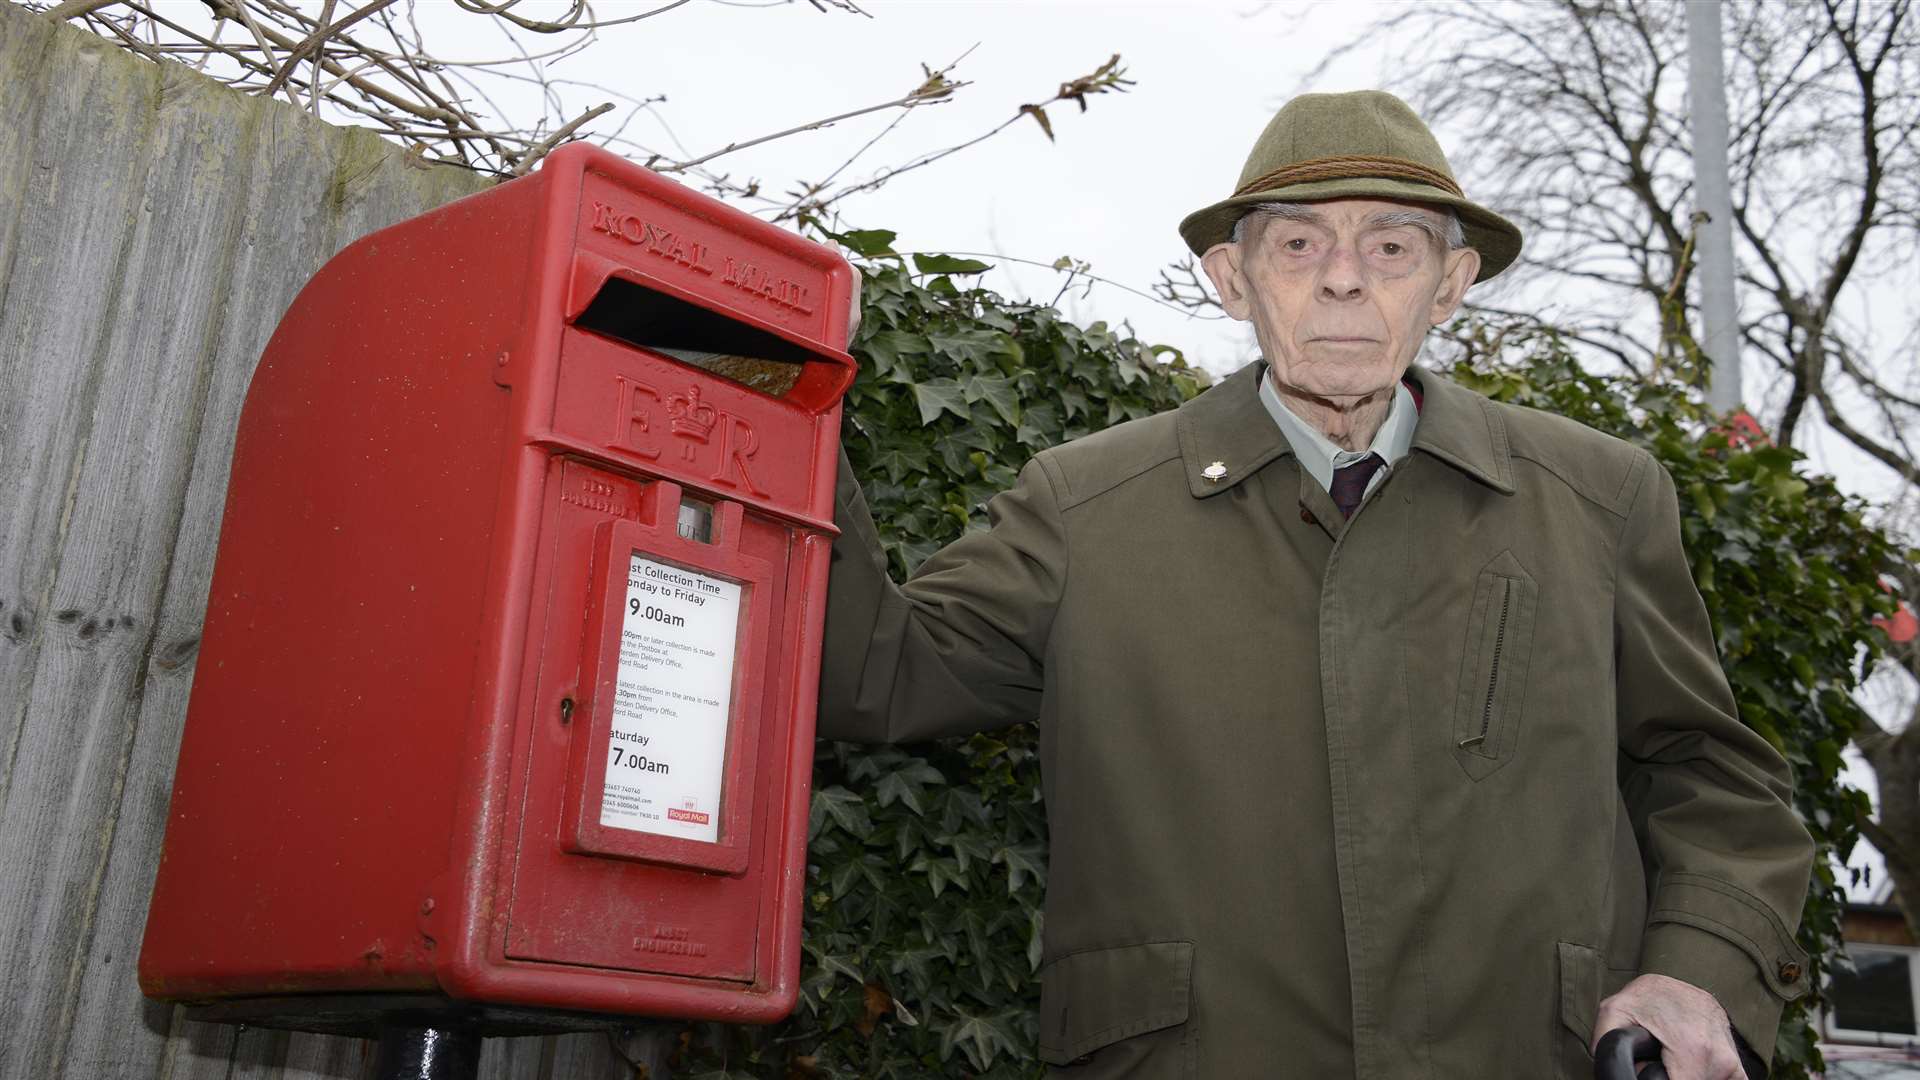 Patrick O'Keeffe is complaining about the collection time being changed at his postbox in Turners Avenue, Tenterden.